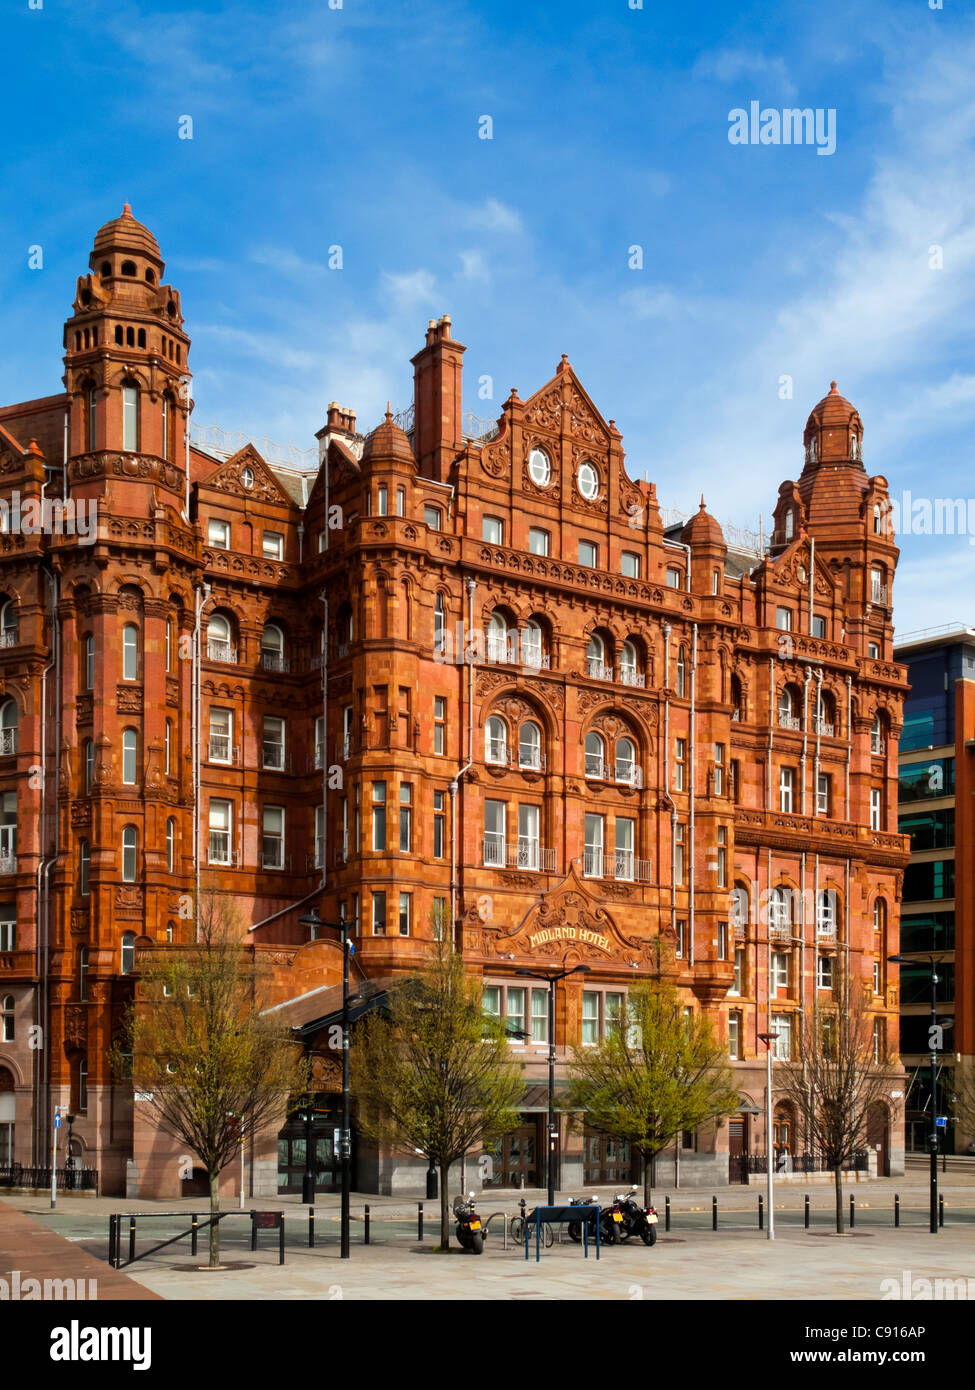 The Midland Hotel in central Manchester England UK which opened in 1903 and is clad in red brick and terracotta Stock Photo